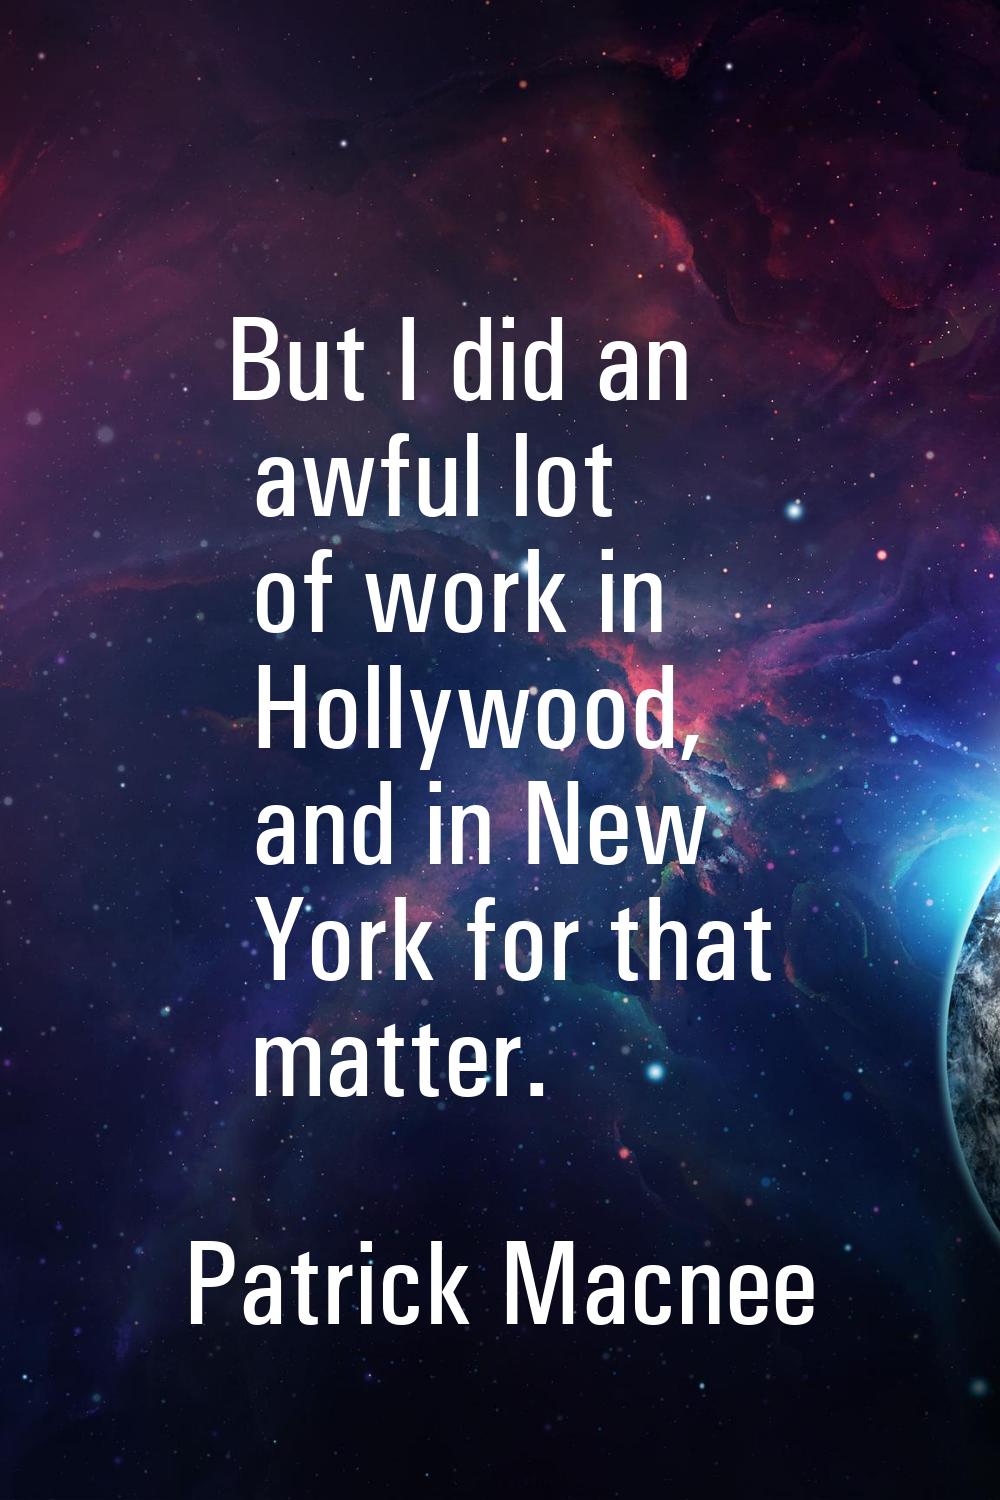 But I did an awful lot of work in Hollywood, and in New York for that matter.